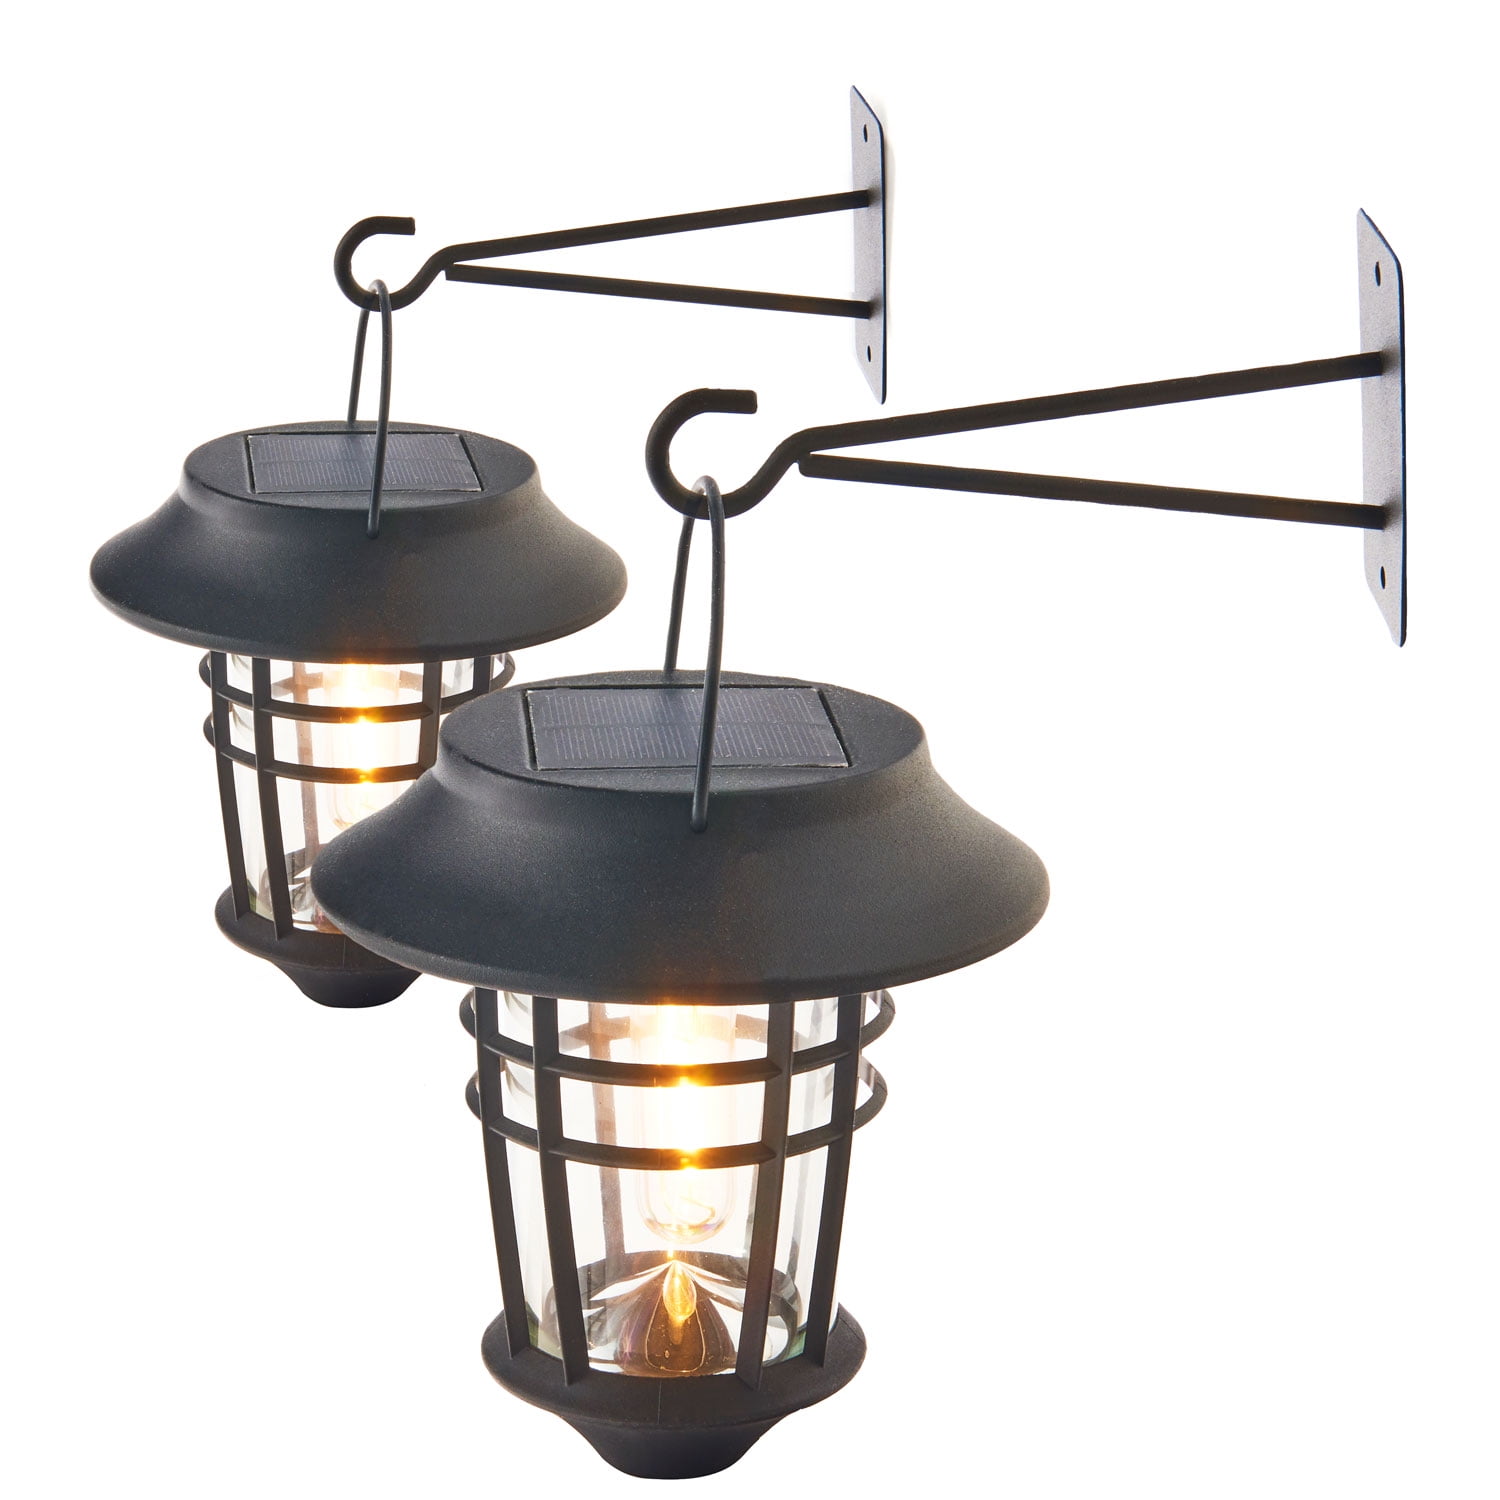 Solar Sconce Lights Outdoor 2 Pack, Black Solar Led Outdoor Wall Lantern Sconce 2 Pack